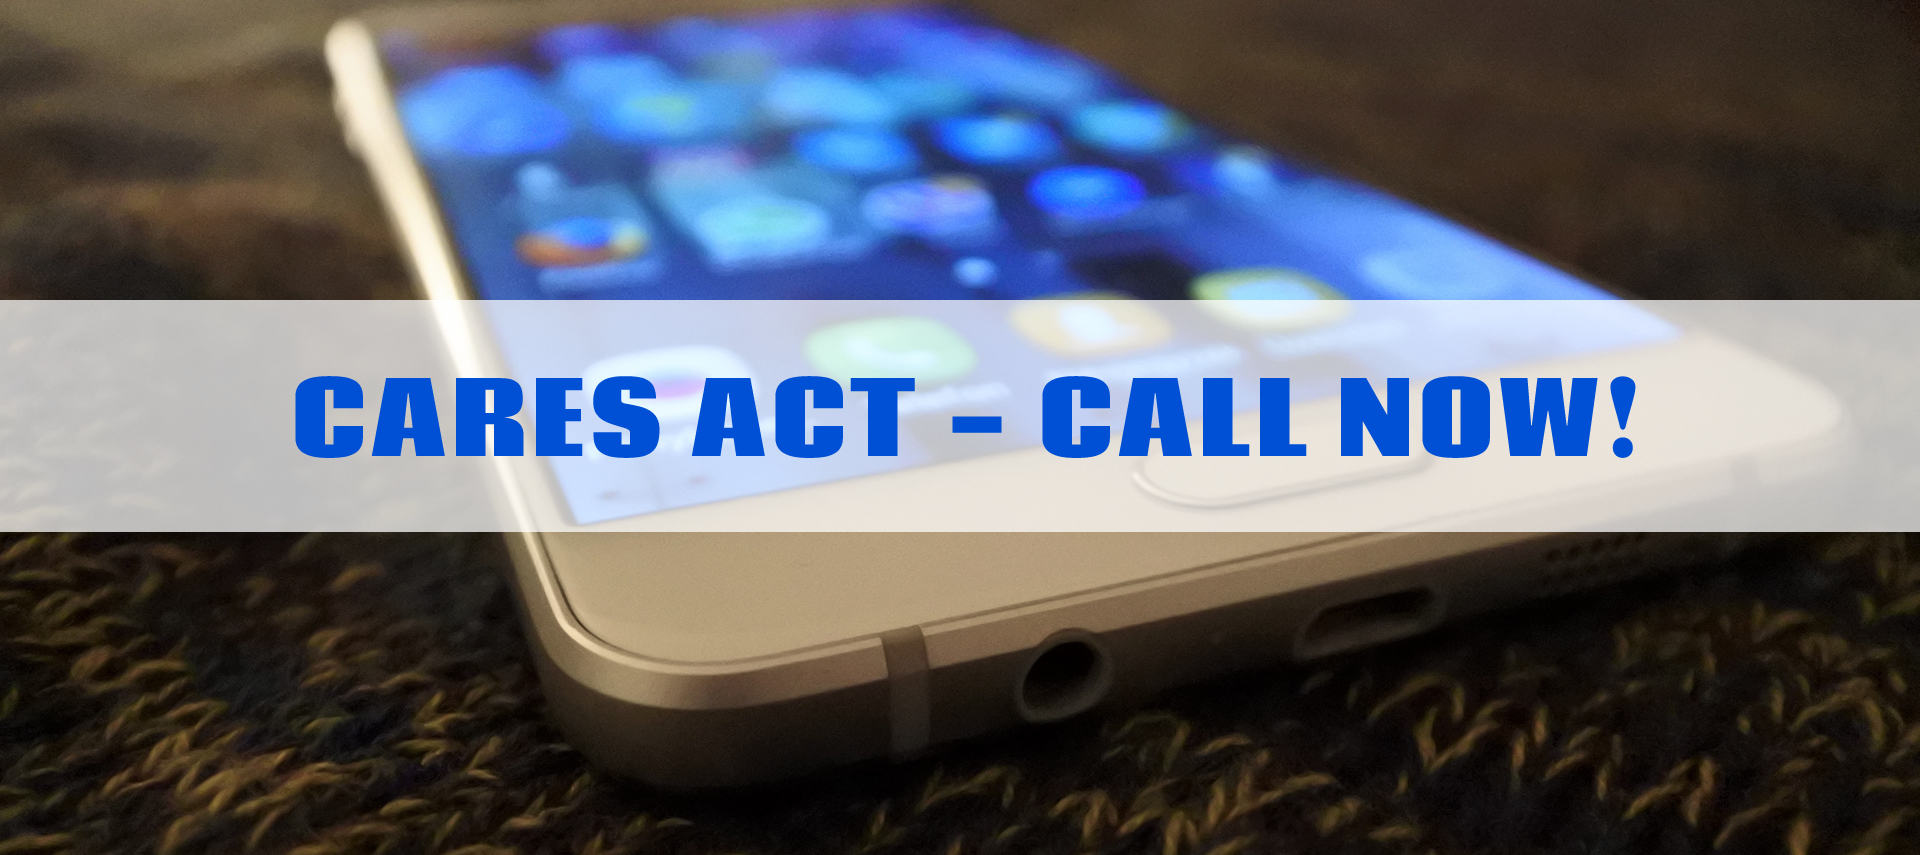 cell phone blurred with writing: CARES ACT CALL NOW